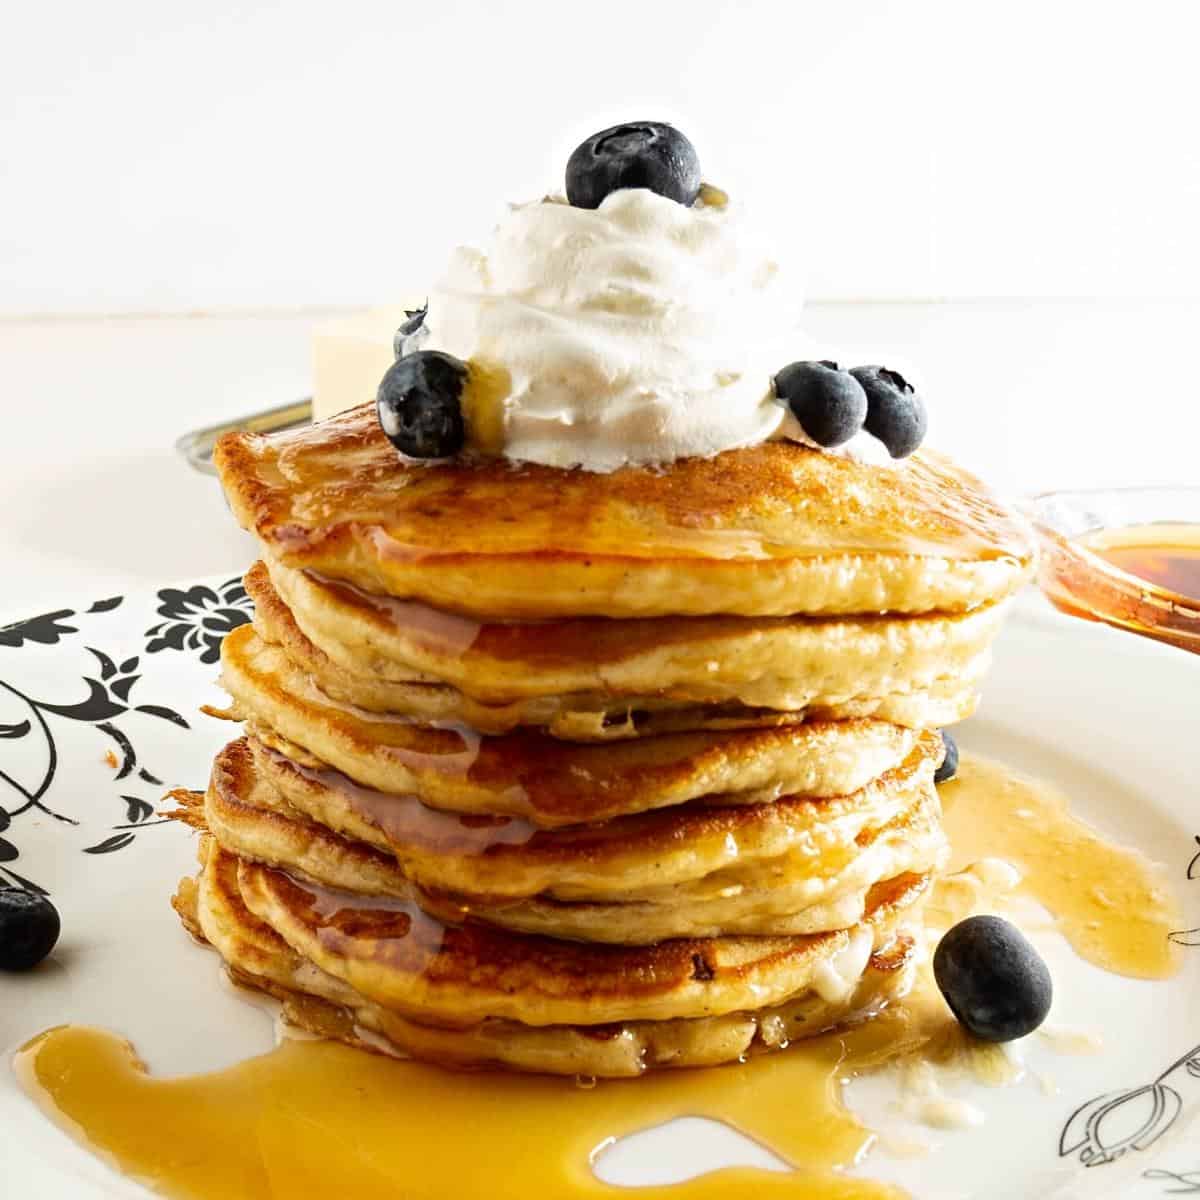 A stack of pancakes with whipped cream and blueberries.